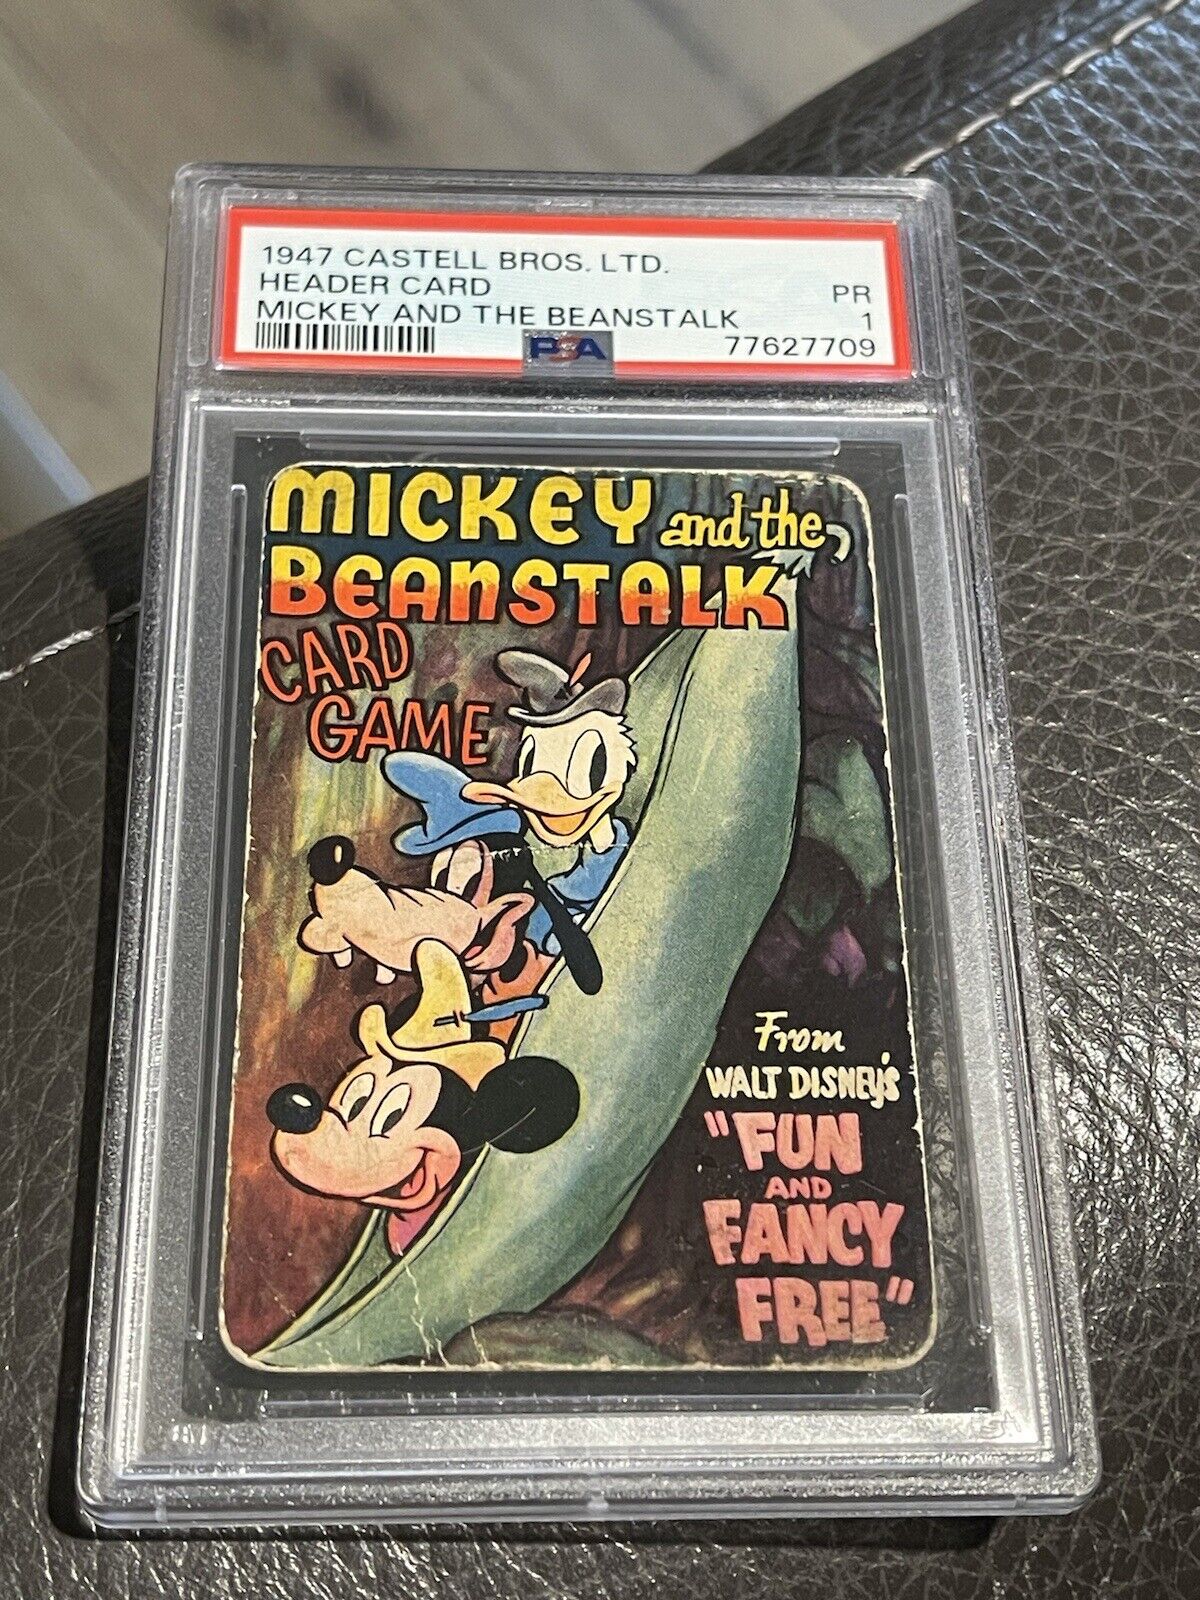 1947 CASTELL BROS. LTD. HEADER CARD PSA MICKEY AND THE BEANSTALK MICKEY MOUSE